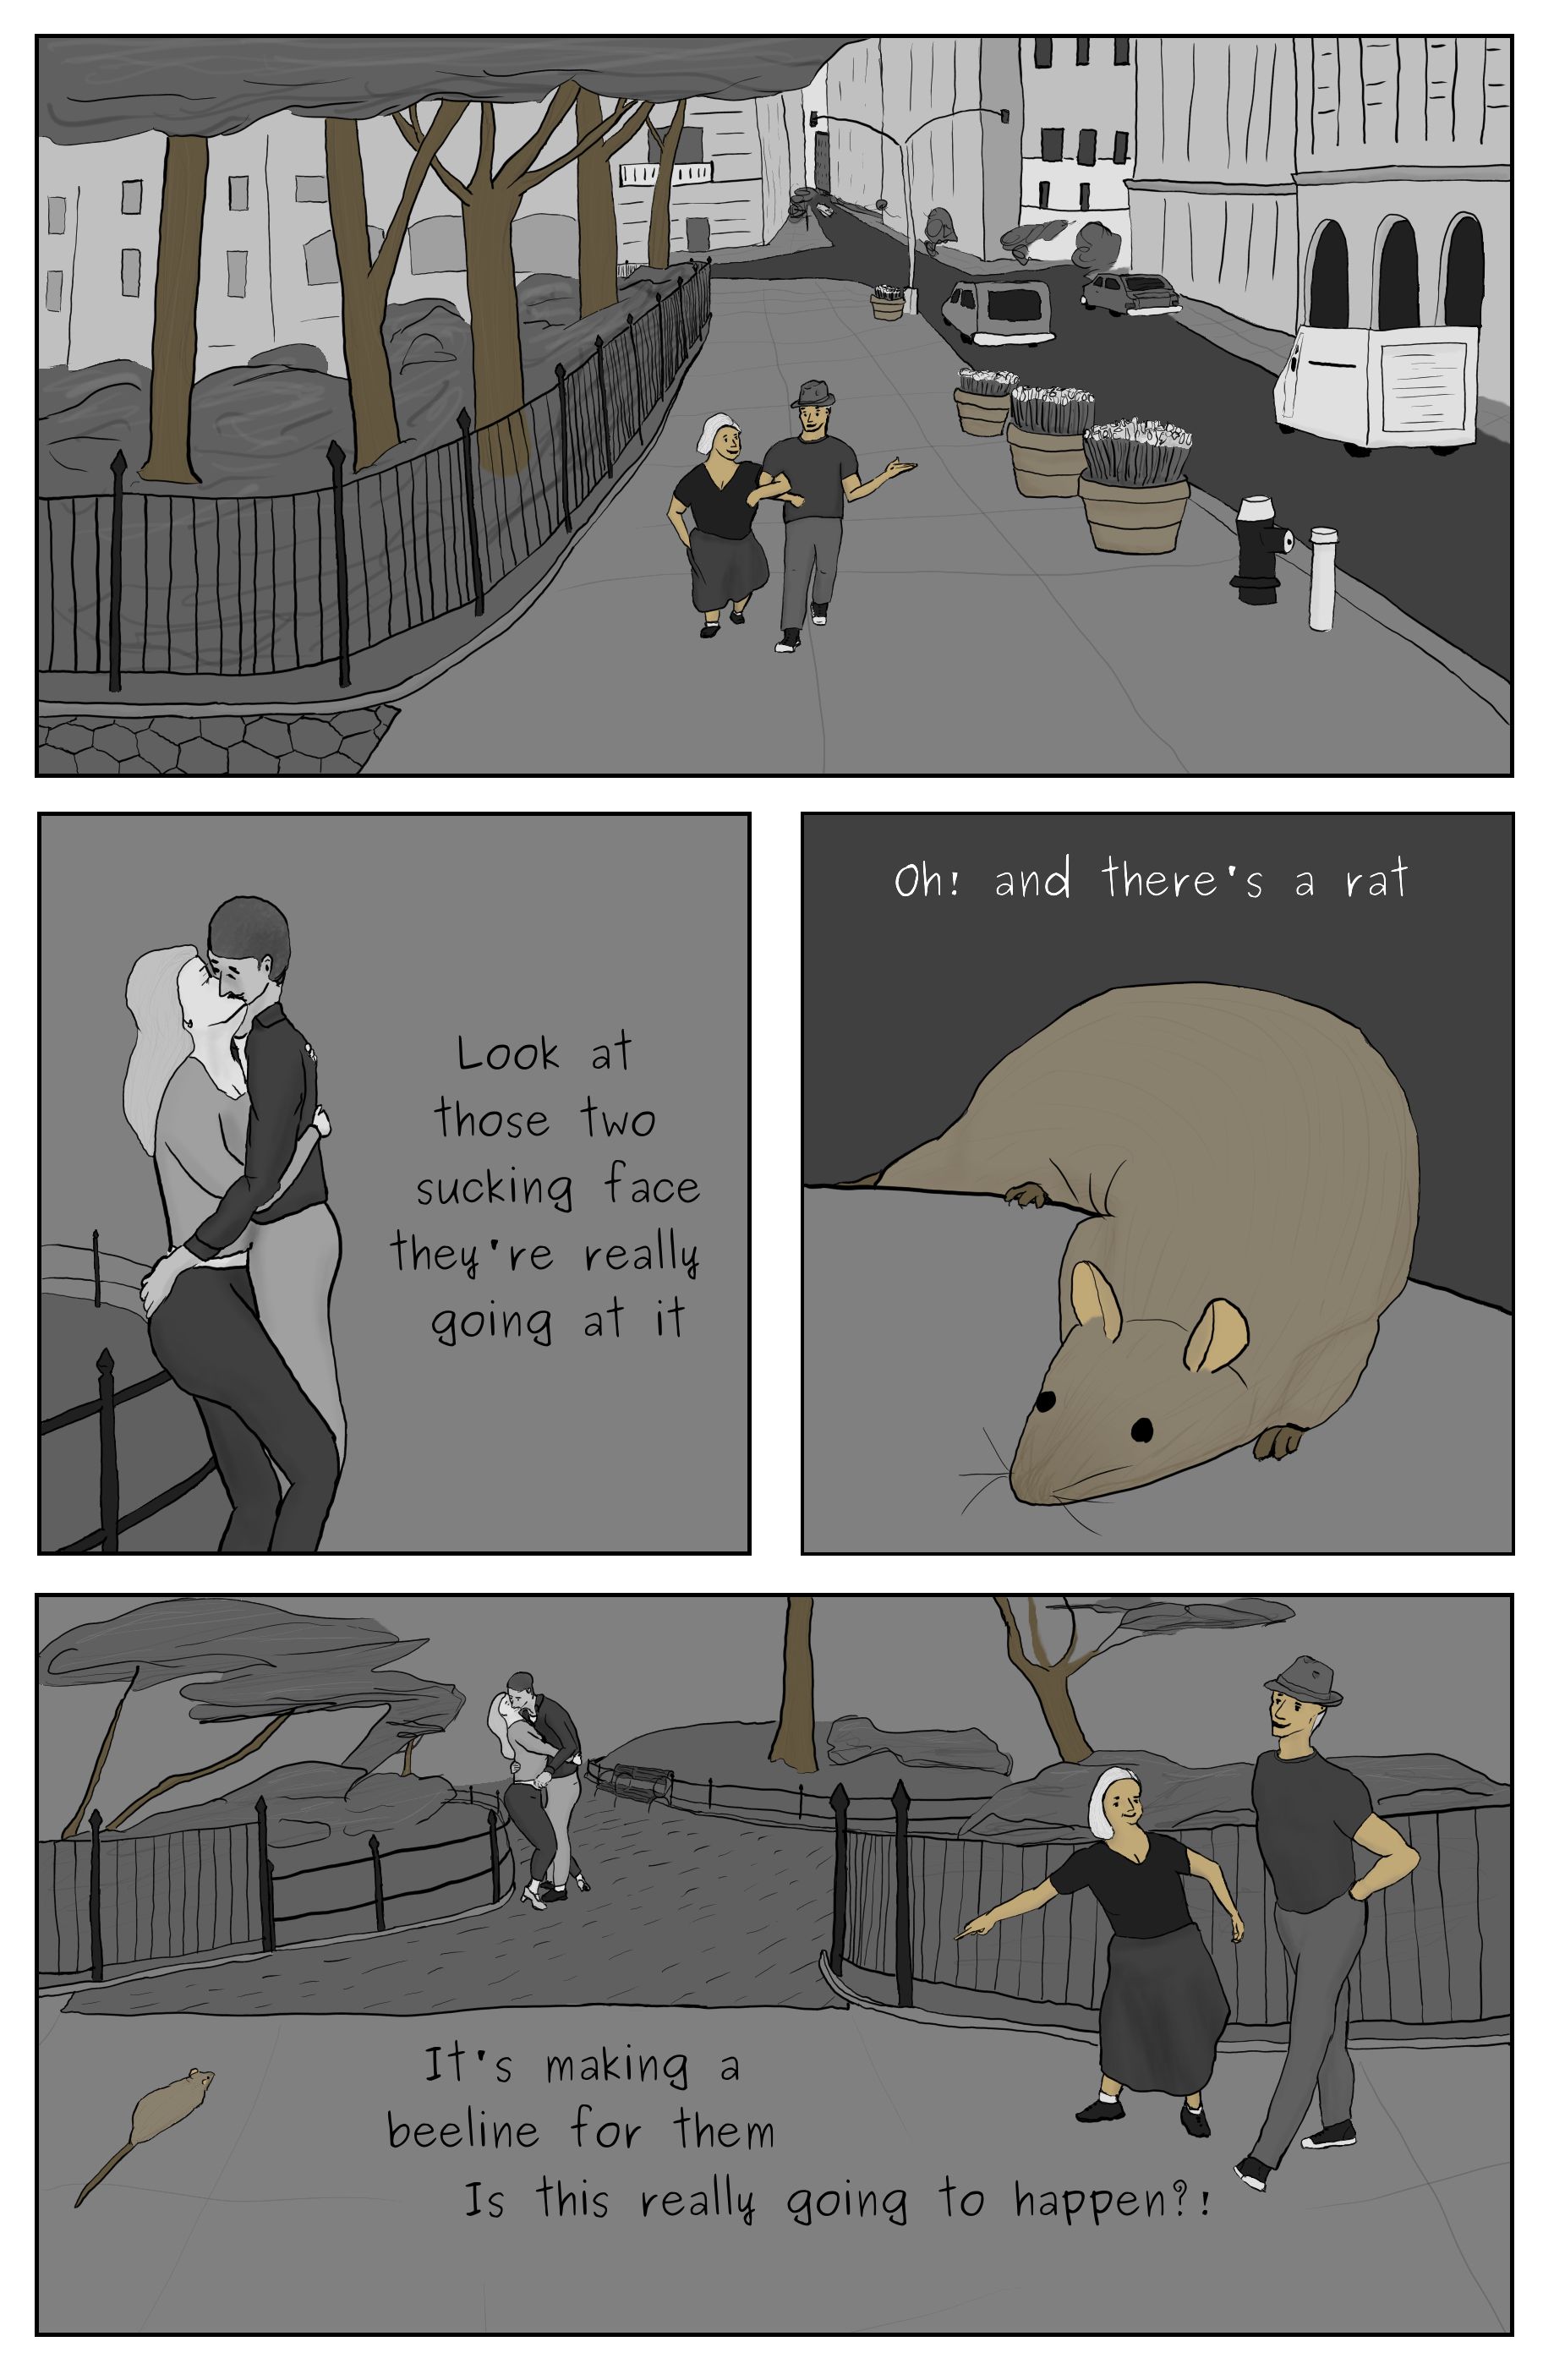 A comic featuring a scene near Madison Square Park with Phillip Gerba and Shannon Haddock laughing, a young couple making out, a rat climbing onto the sidewalk from the curb, and a scene where Shannon Haddock is pointing out that the rat is headed straight toward the couple making out.